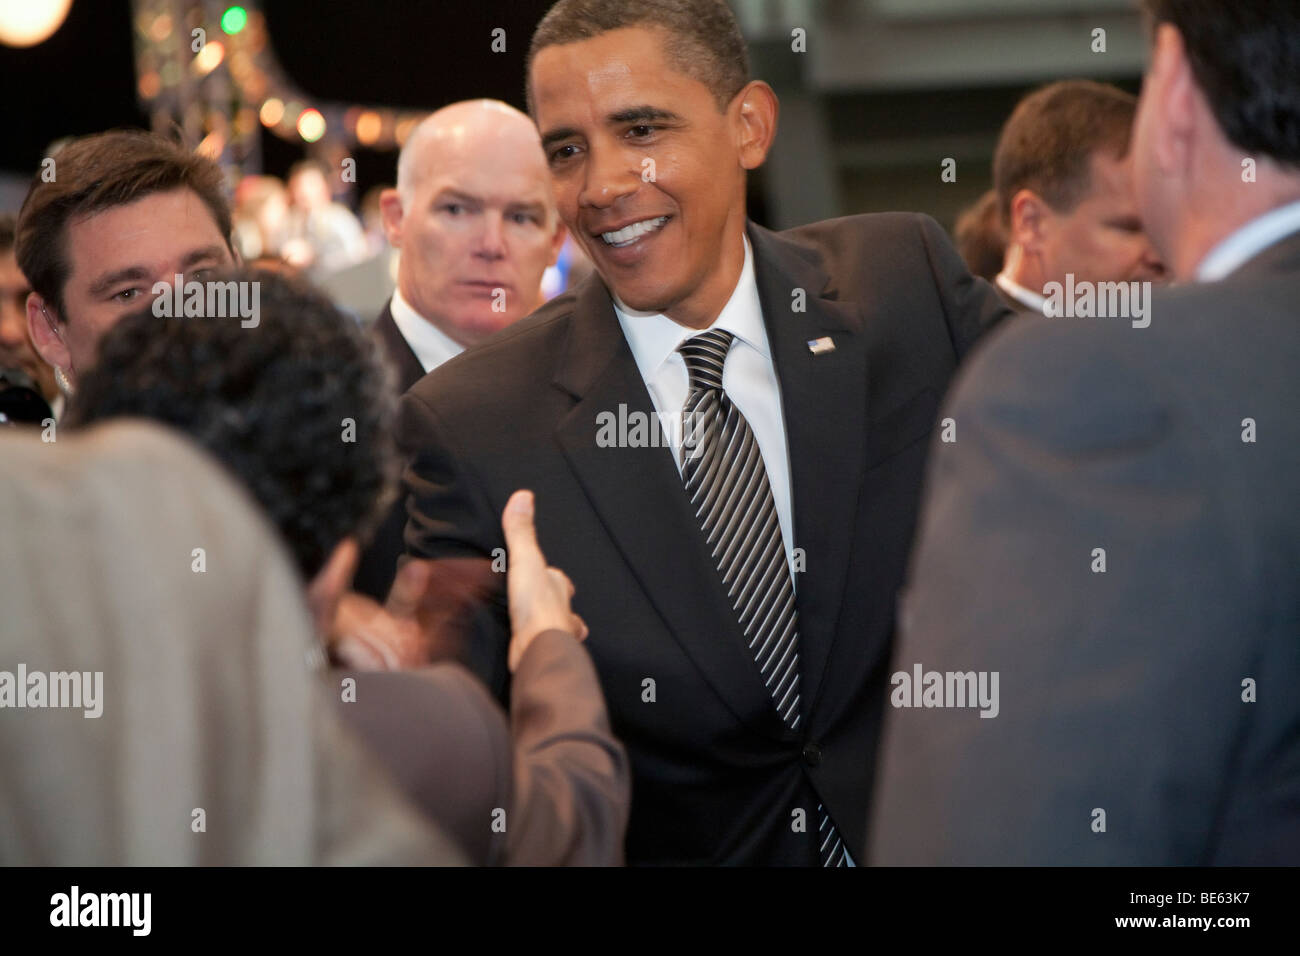 Pittsburgh, Pennsylvania - President Barack Obama shakes hands with delegates attending the AFL-CIO convention. Stock Photo